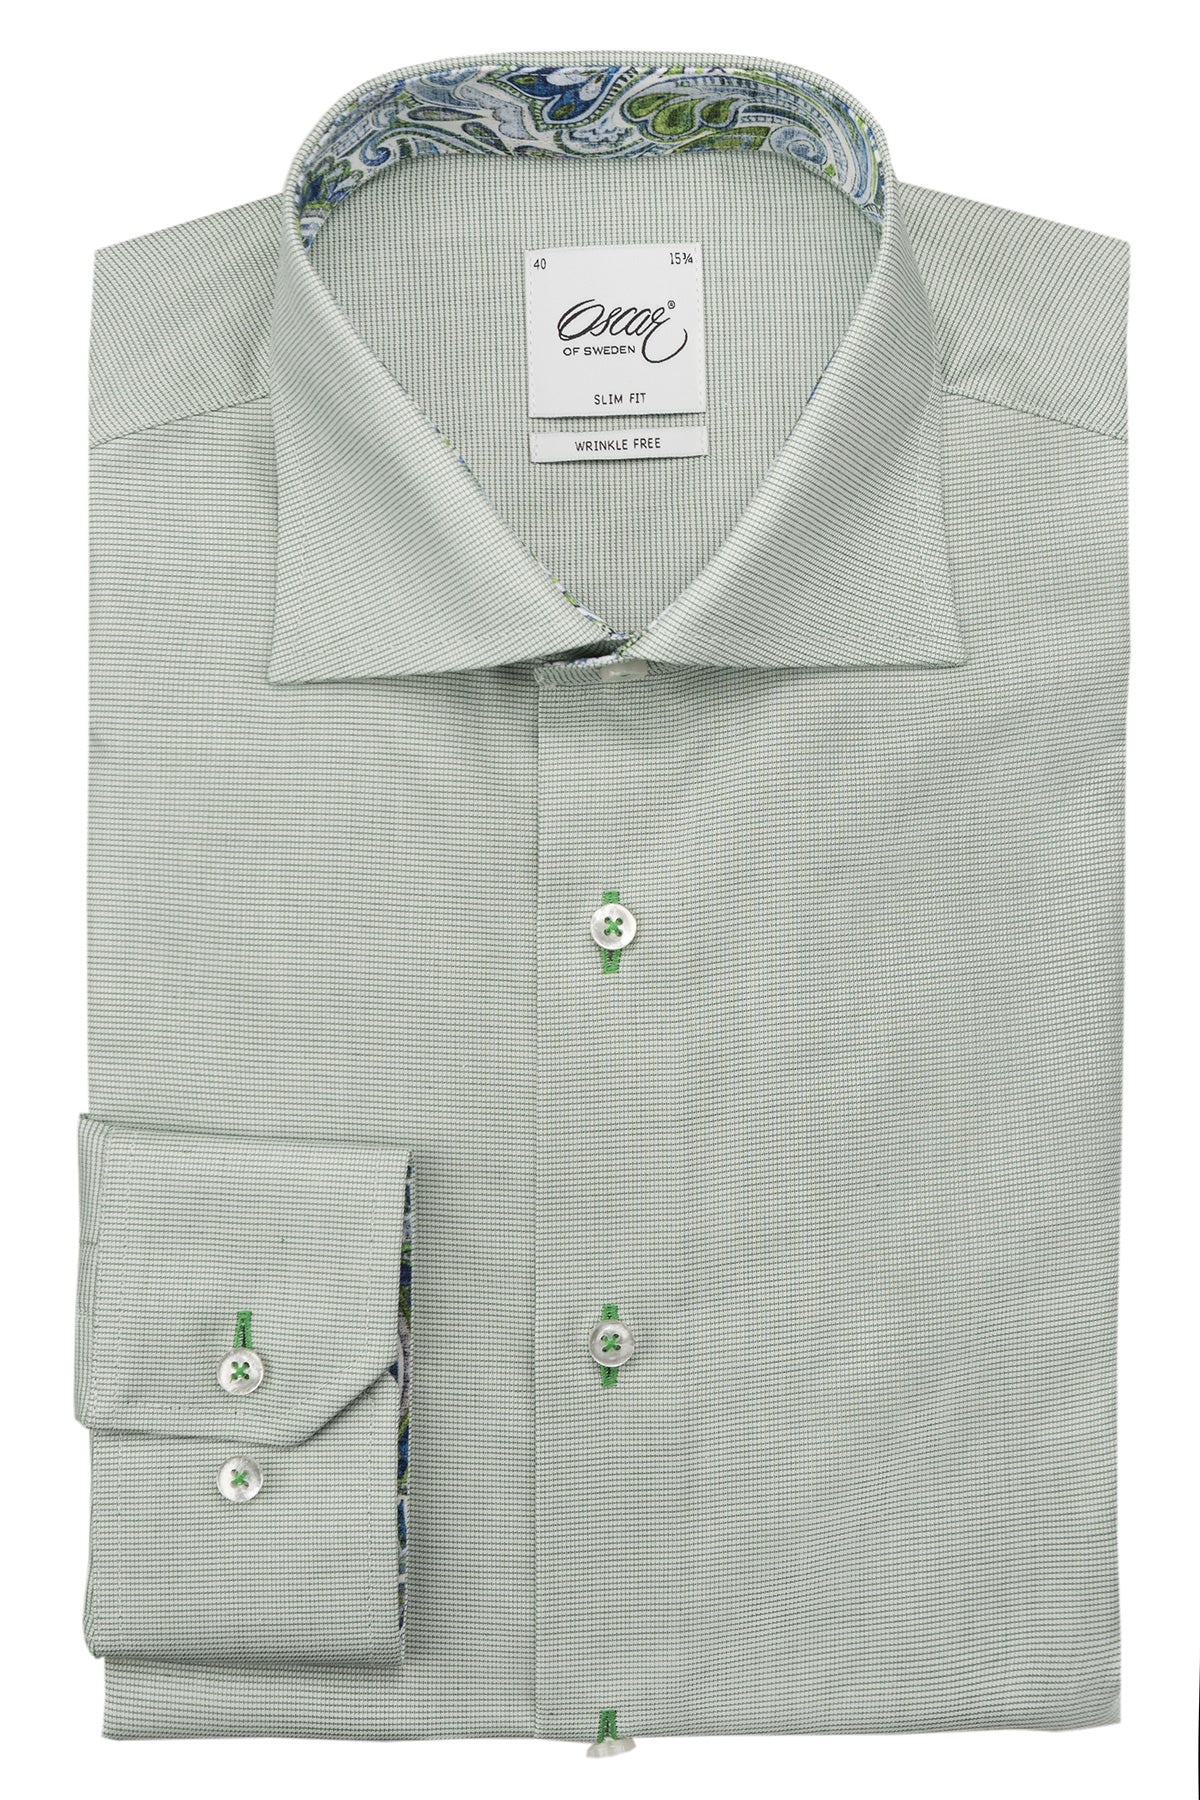 Green slim fit shirt with contrast details